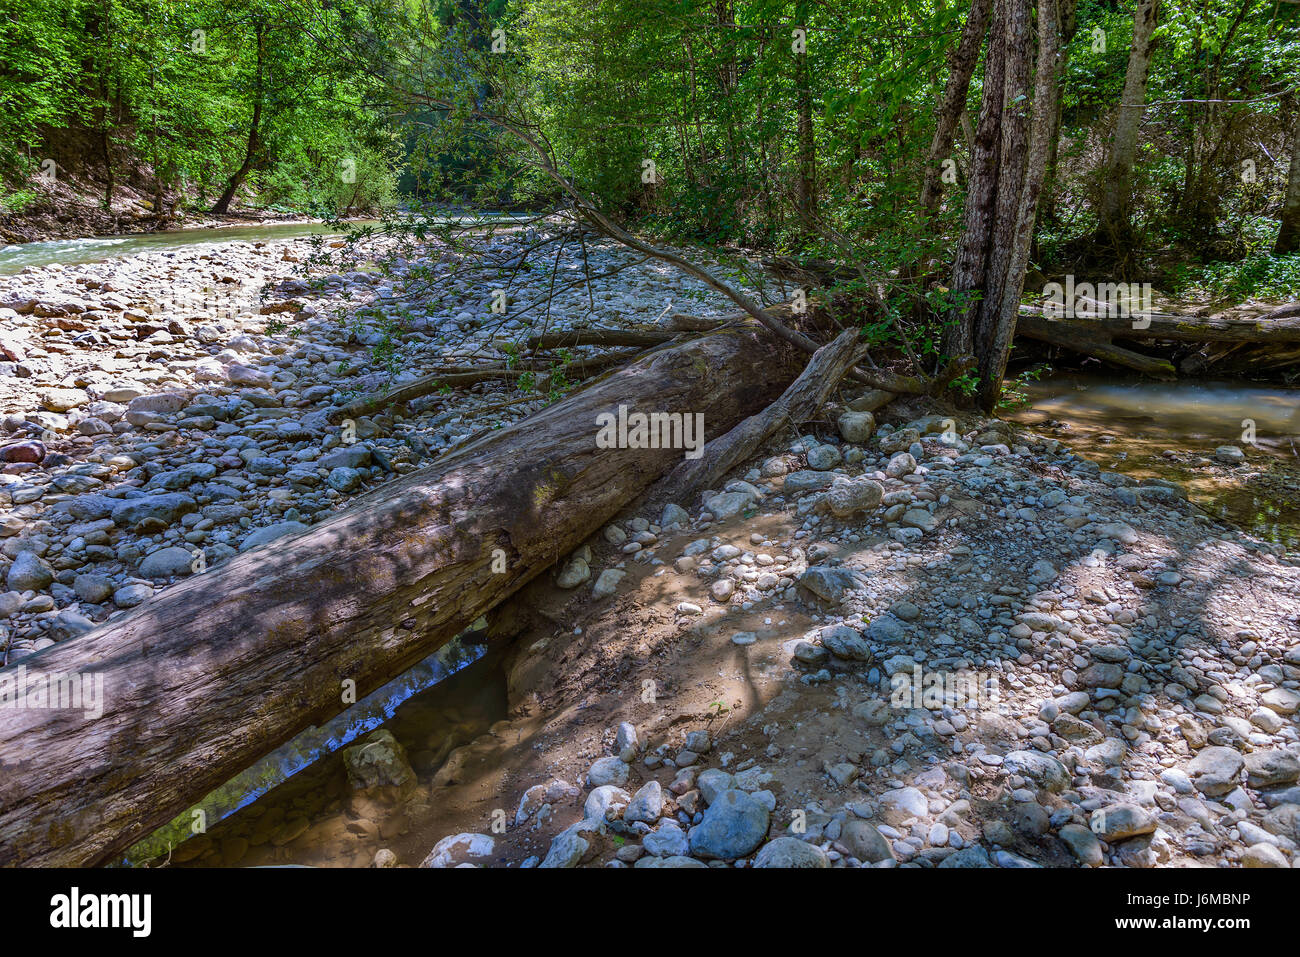 A fallen tree lies on the stony bank of a mountain river Stock Photo